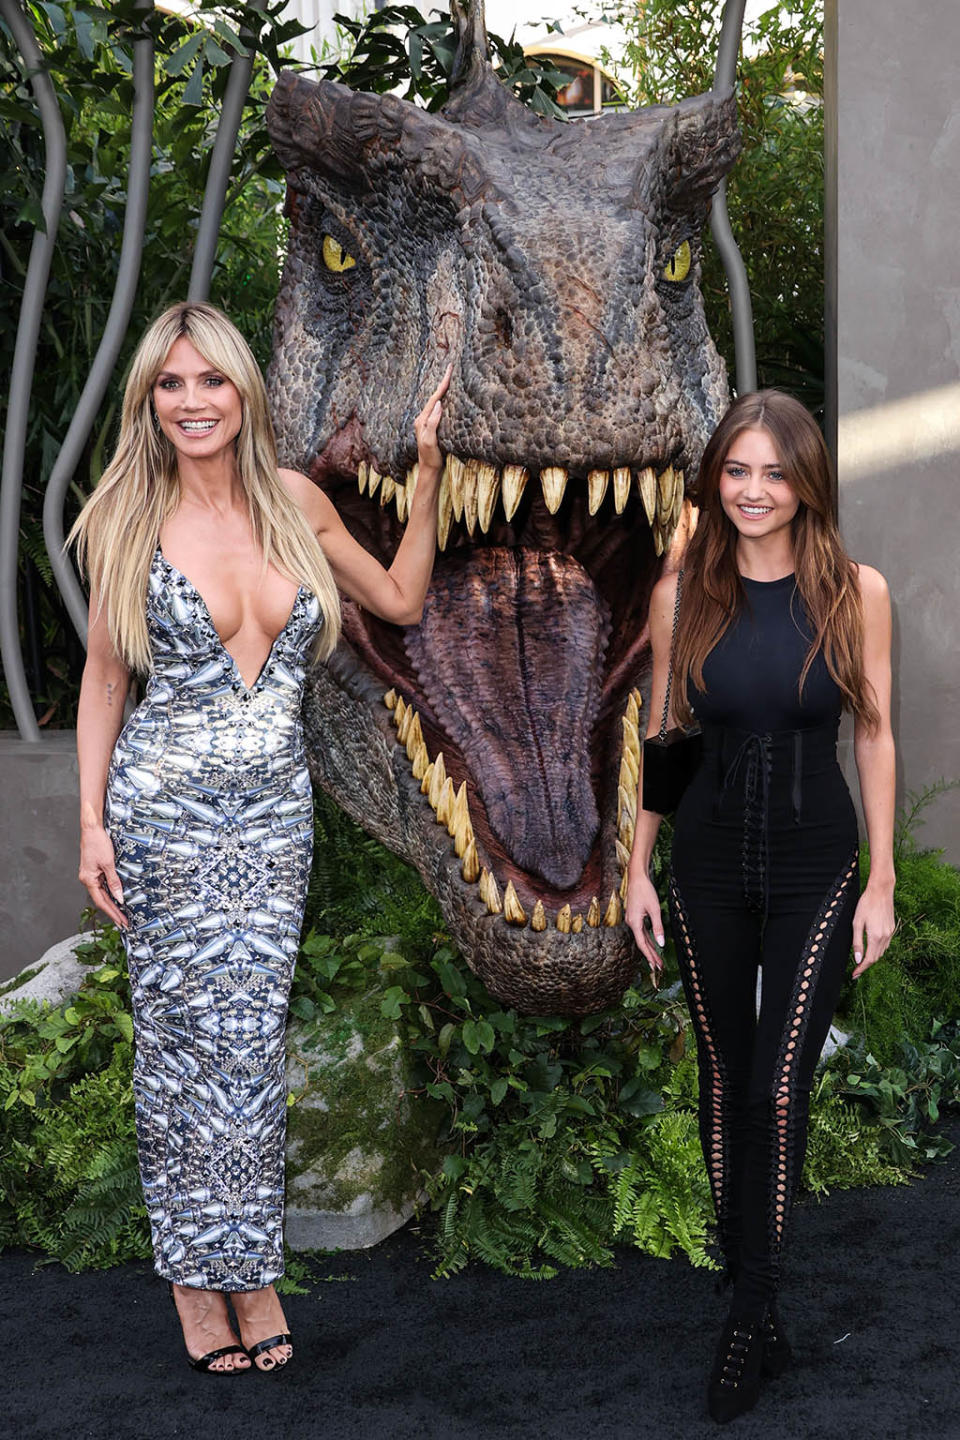 Heidi Klum and her daughter Leni Klum at the premiere of “Jurassic World: Dominion” on June 6. - Credit: Xavier Collin/Image Press Agency